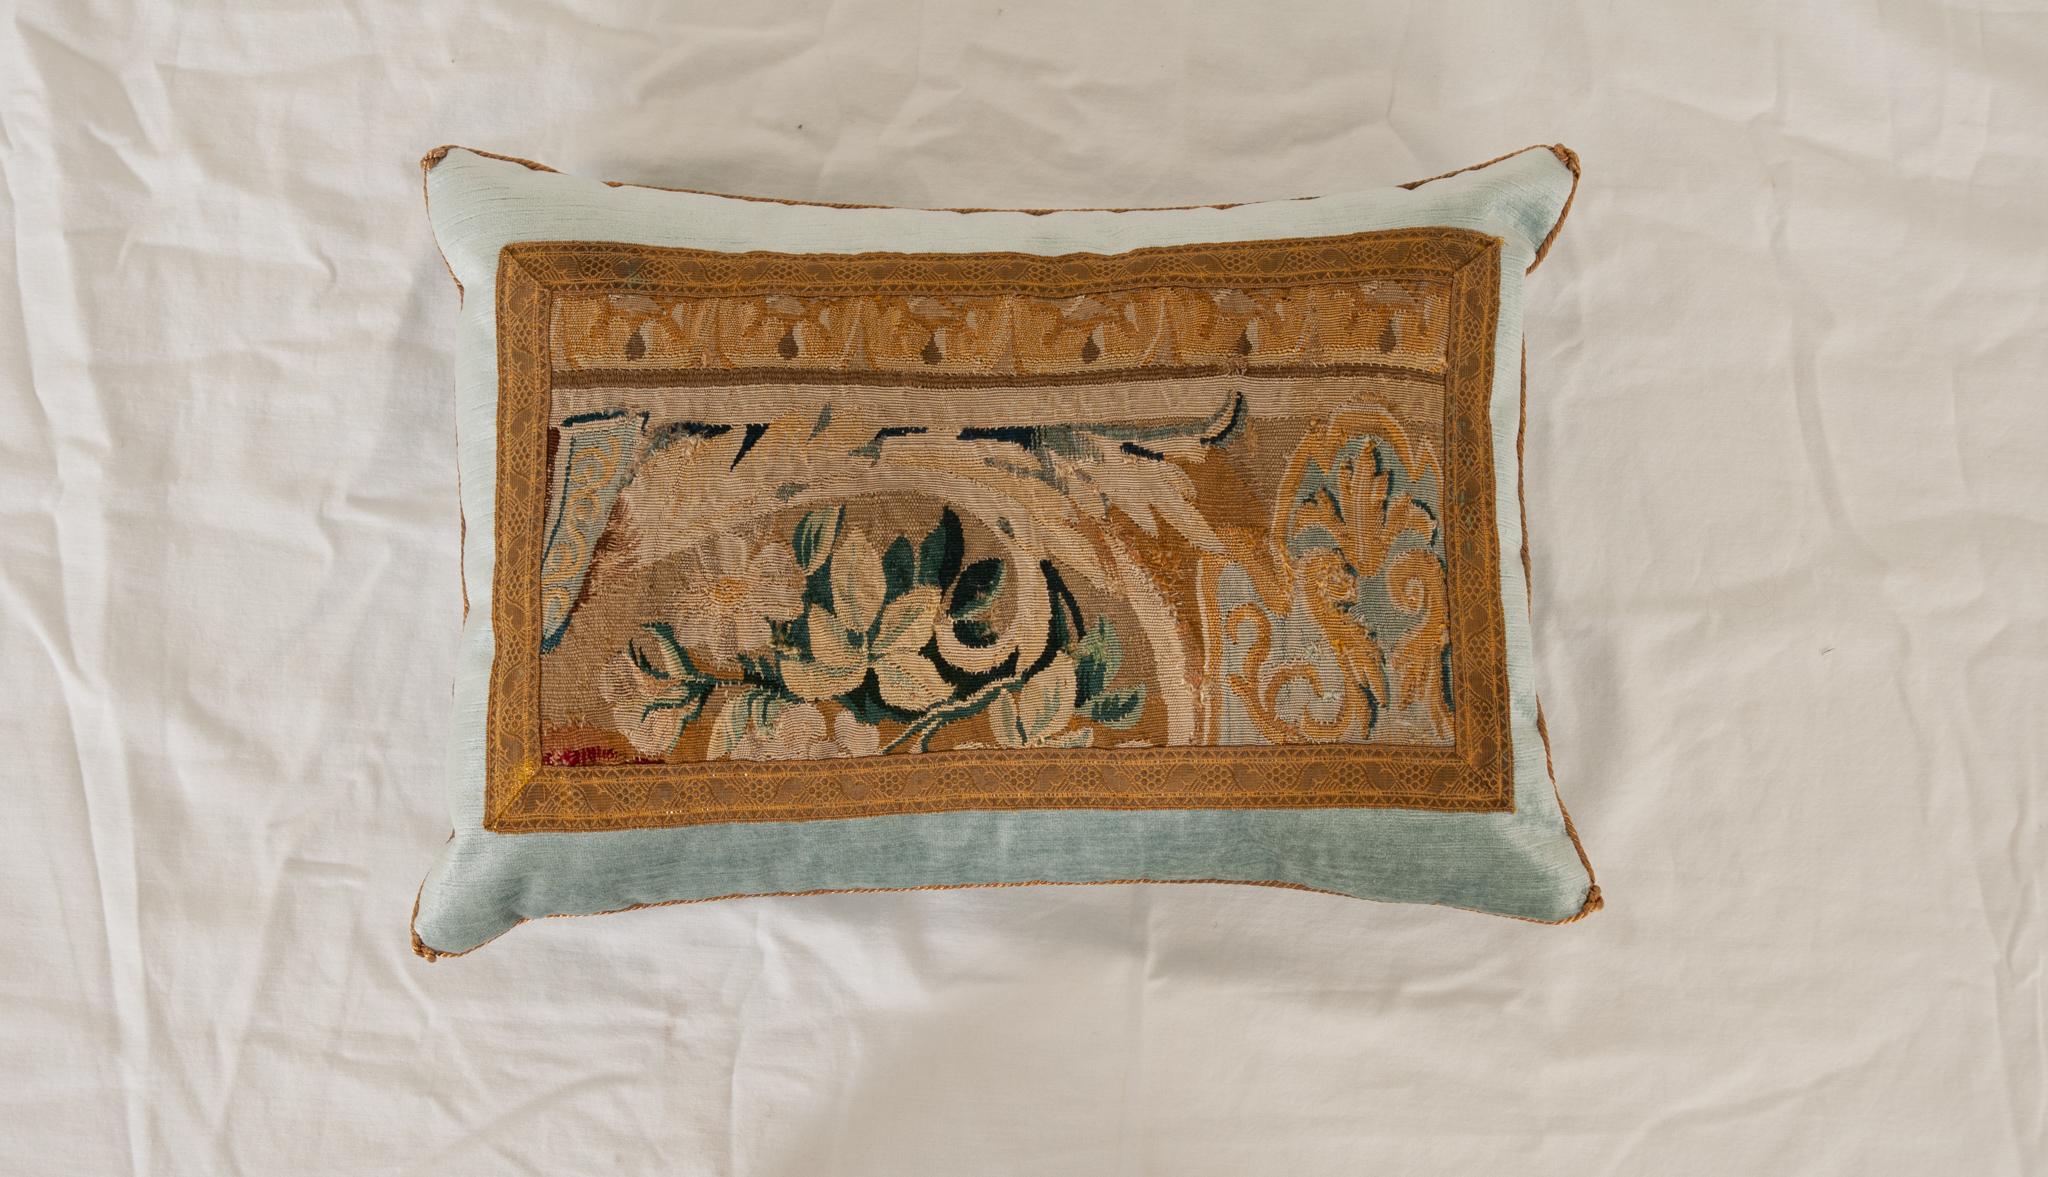 Antique 18th Century tapestry fragment, bordered with antique gold metallic galon on sky blue velvet. Hand trimmed and knotted in the corners.